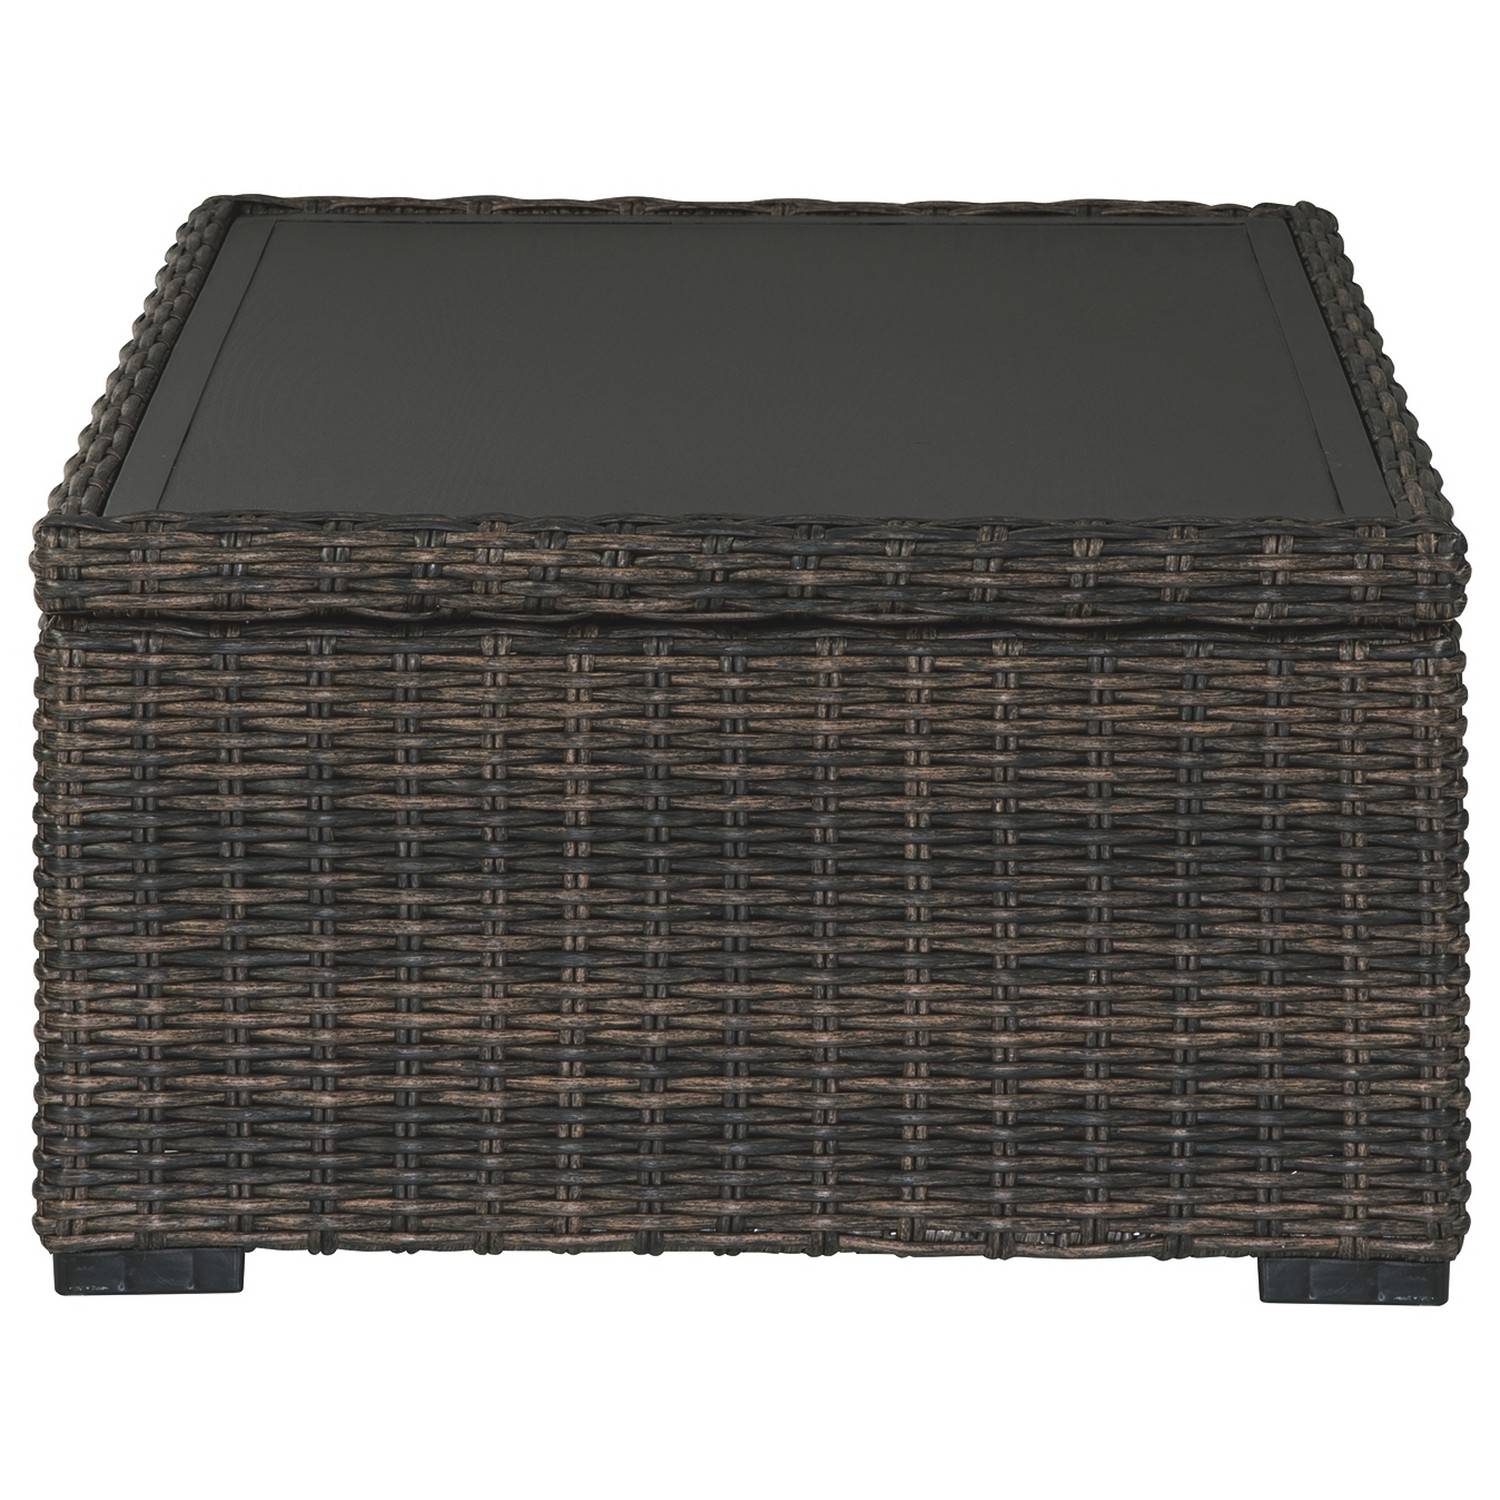 Wicker Woven Aluminum Frame Cocktail Table With Open Shelf, Brown And Black- Saltoro Sherpi